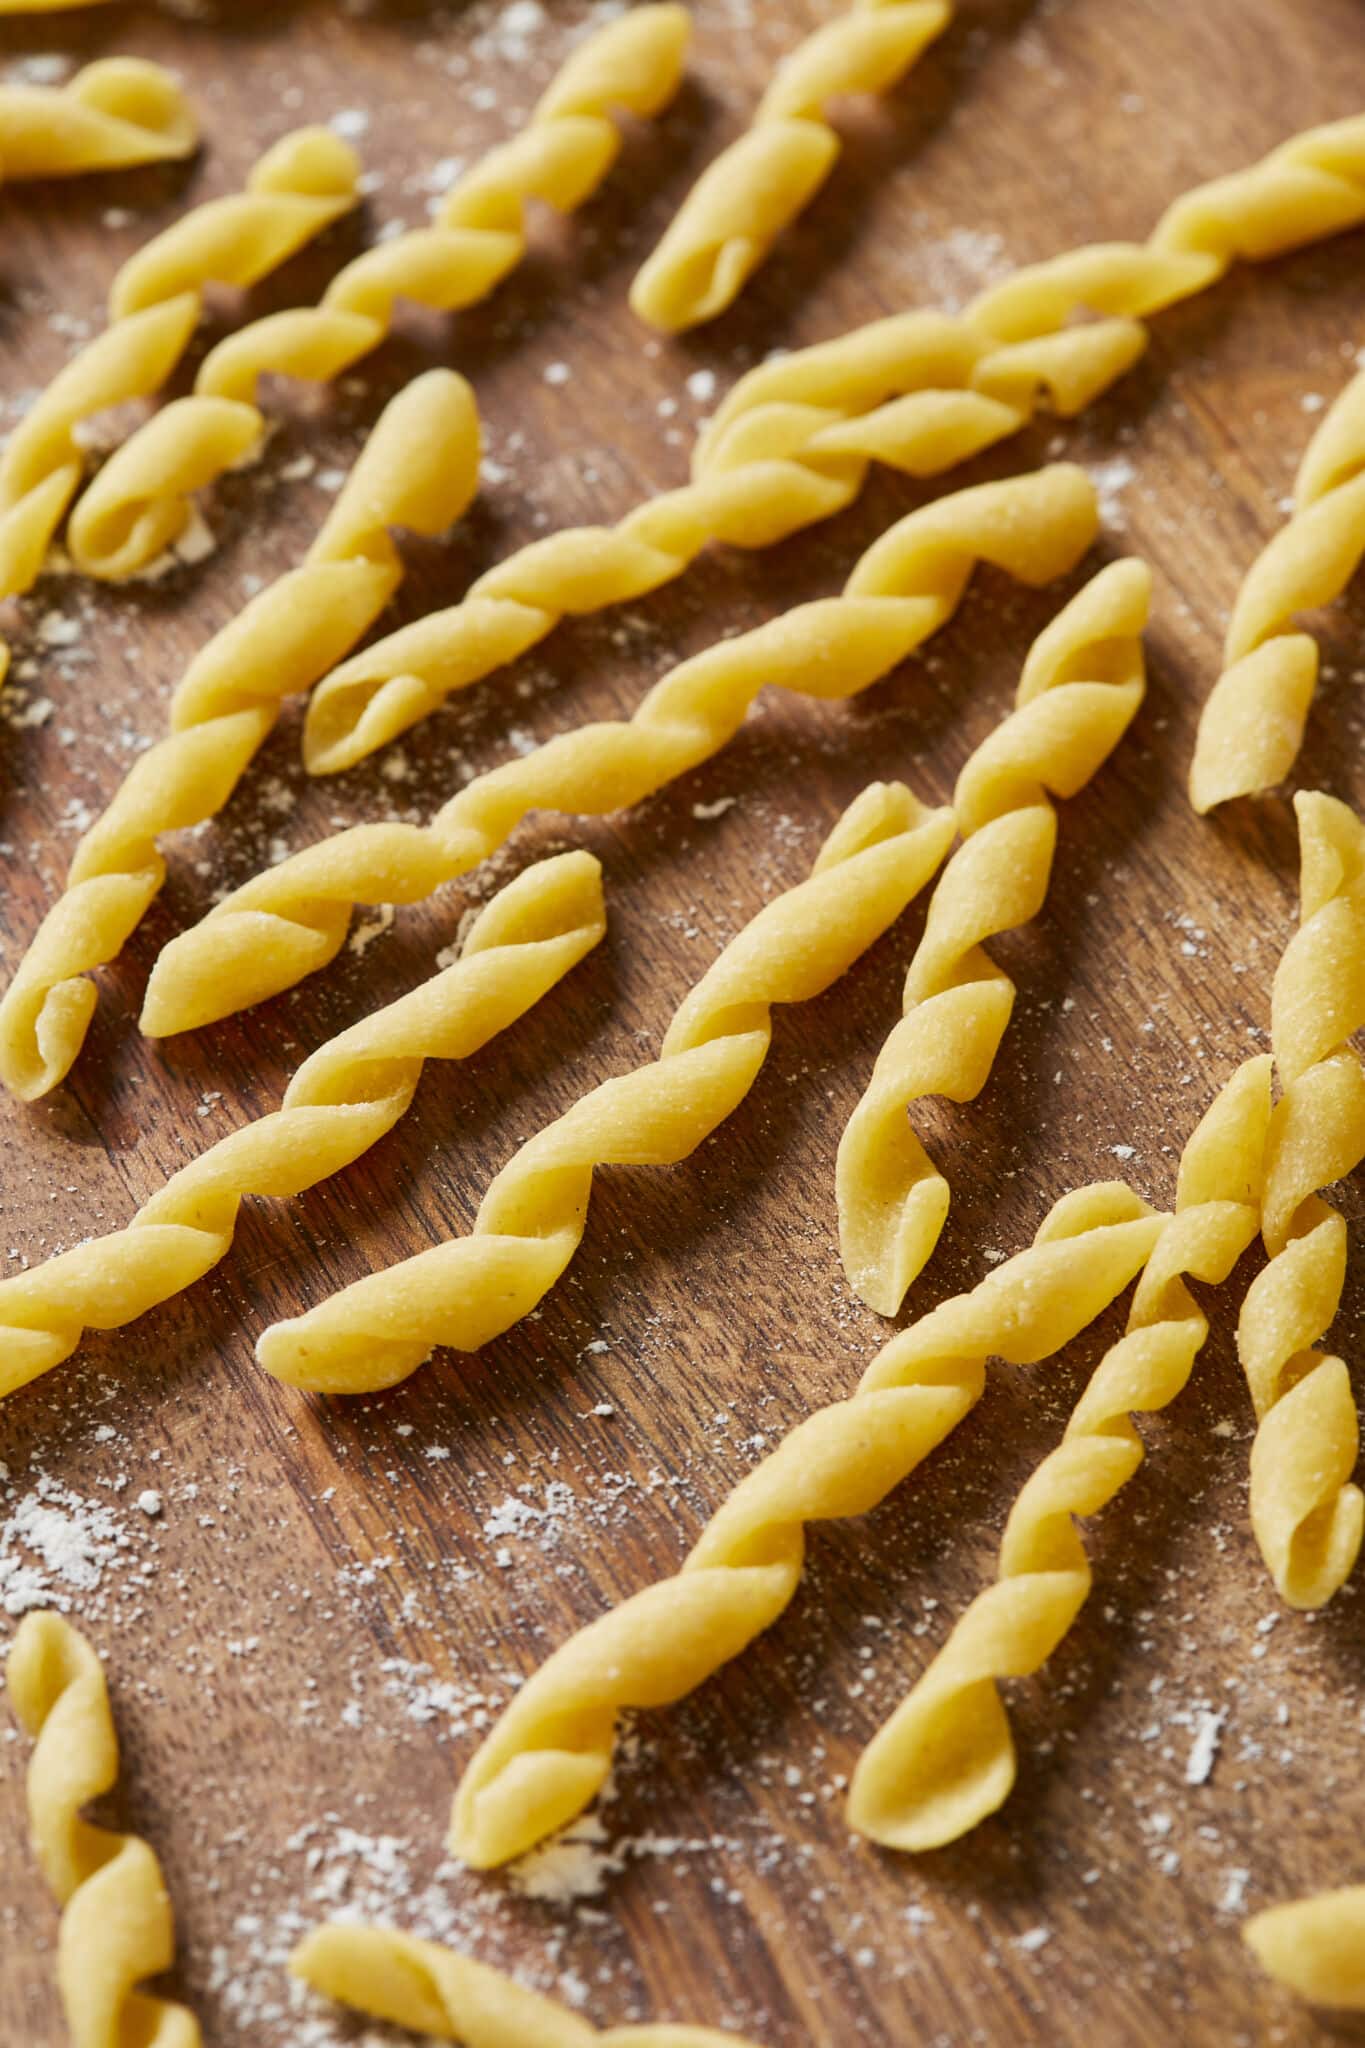 A close shot of yellow semolina Busiate pasta: Busiate is in coil or cord shape and placed on a lightly-floured wooden board. 